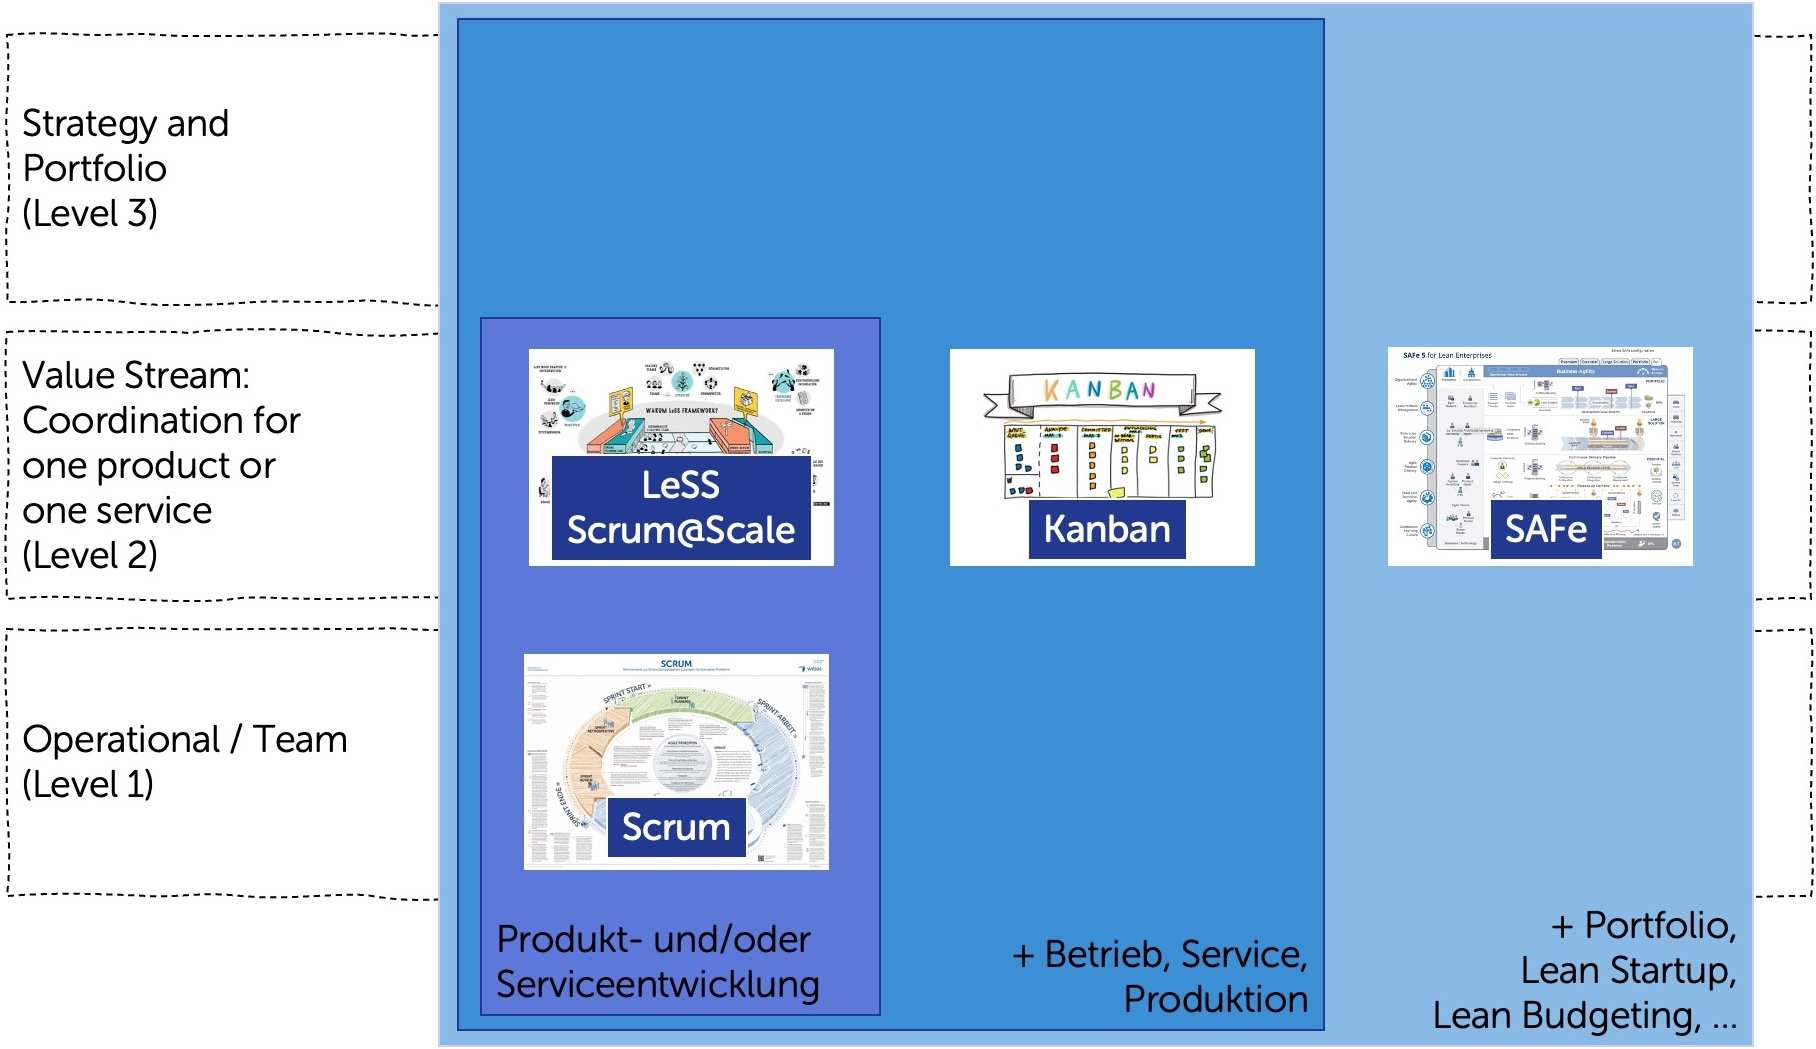 Scrum, LeSS, Kanban and SAFe: what they address